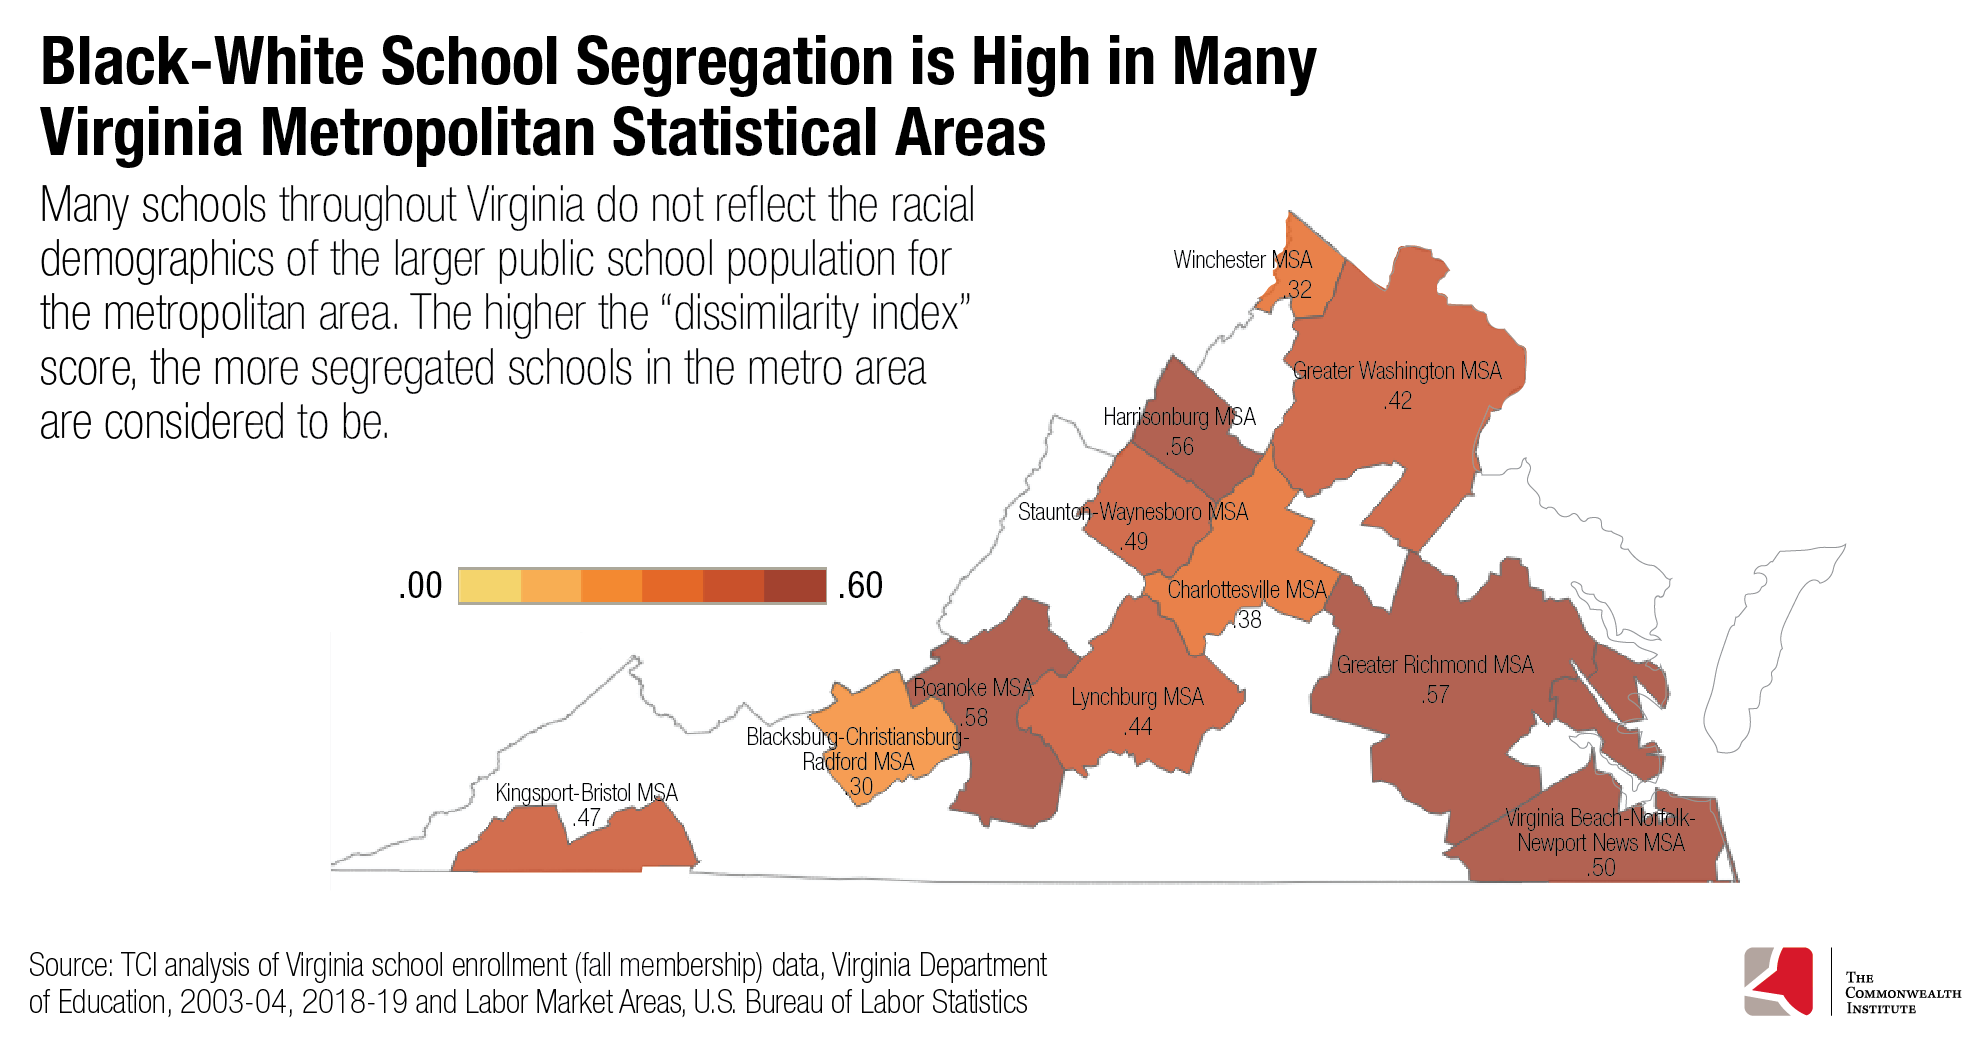 Map of Virginia showing the levels of Black-White school segregation in Virginia Metropolitan Statistical Areas. Many schools throughout Virginia do not reflect the racial demographics of the larger public school population for the metro area